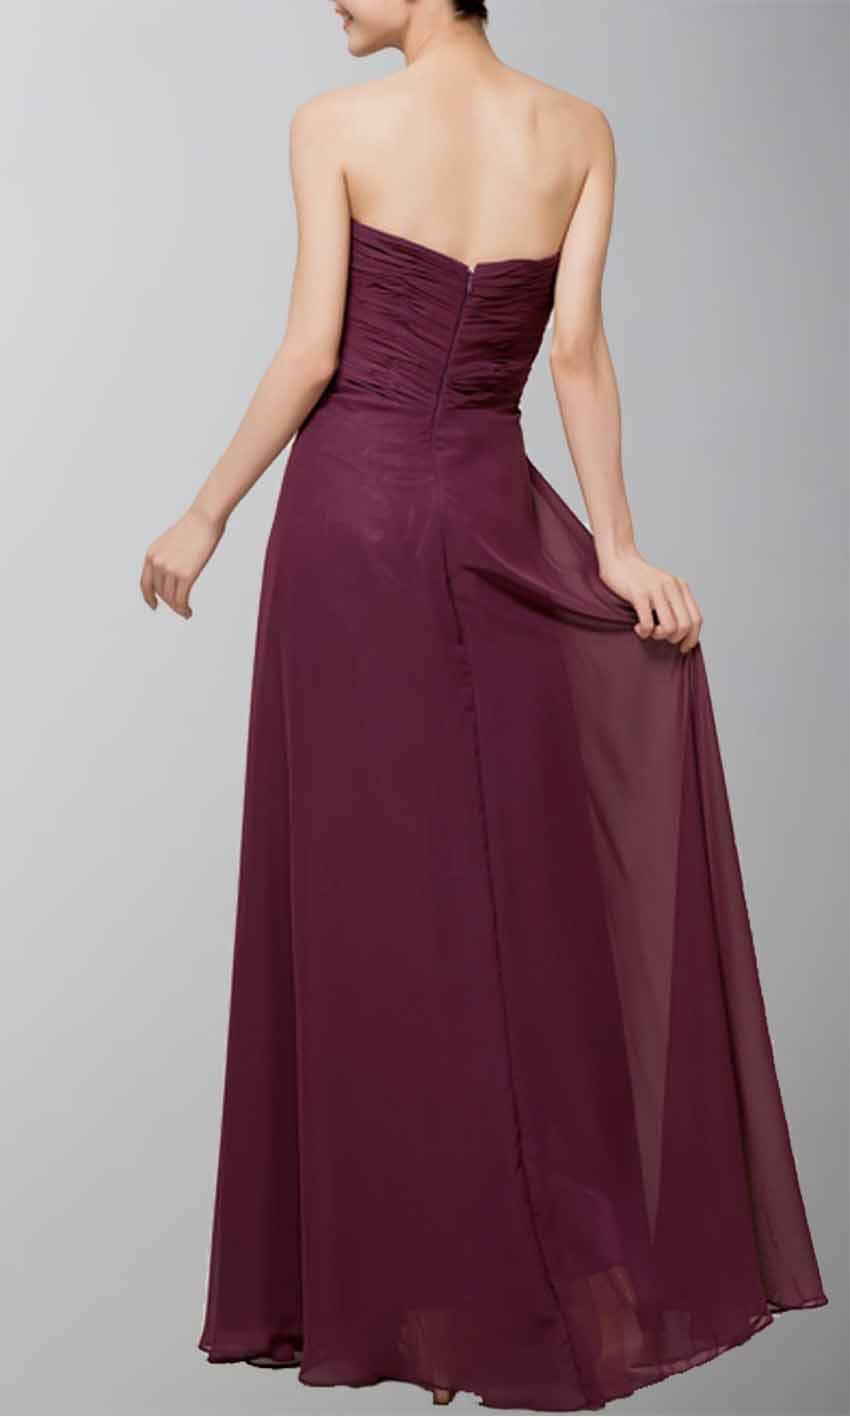 Mariage - Dark Purple Fancy Chiffon Bridesmaid Prom Dress KSP060 [KSP060] - £83.00 : Cheap Prom Dresses Uk, Bridesmaid Dresses, 2014 Prom & Evening Dresses, Look for cheap elegant prom dresses 2014, cocktail gowns, or dresses for special occasions? kissprom.co.uk o